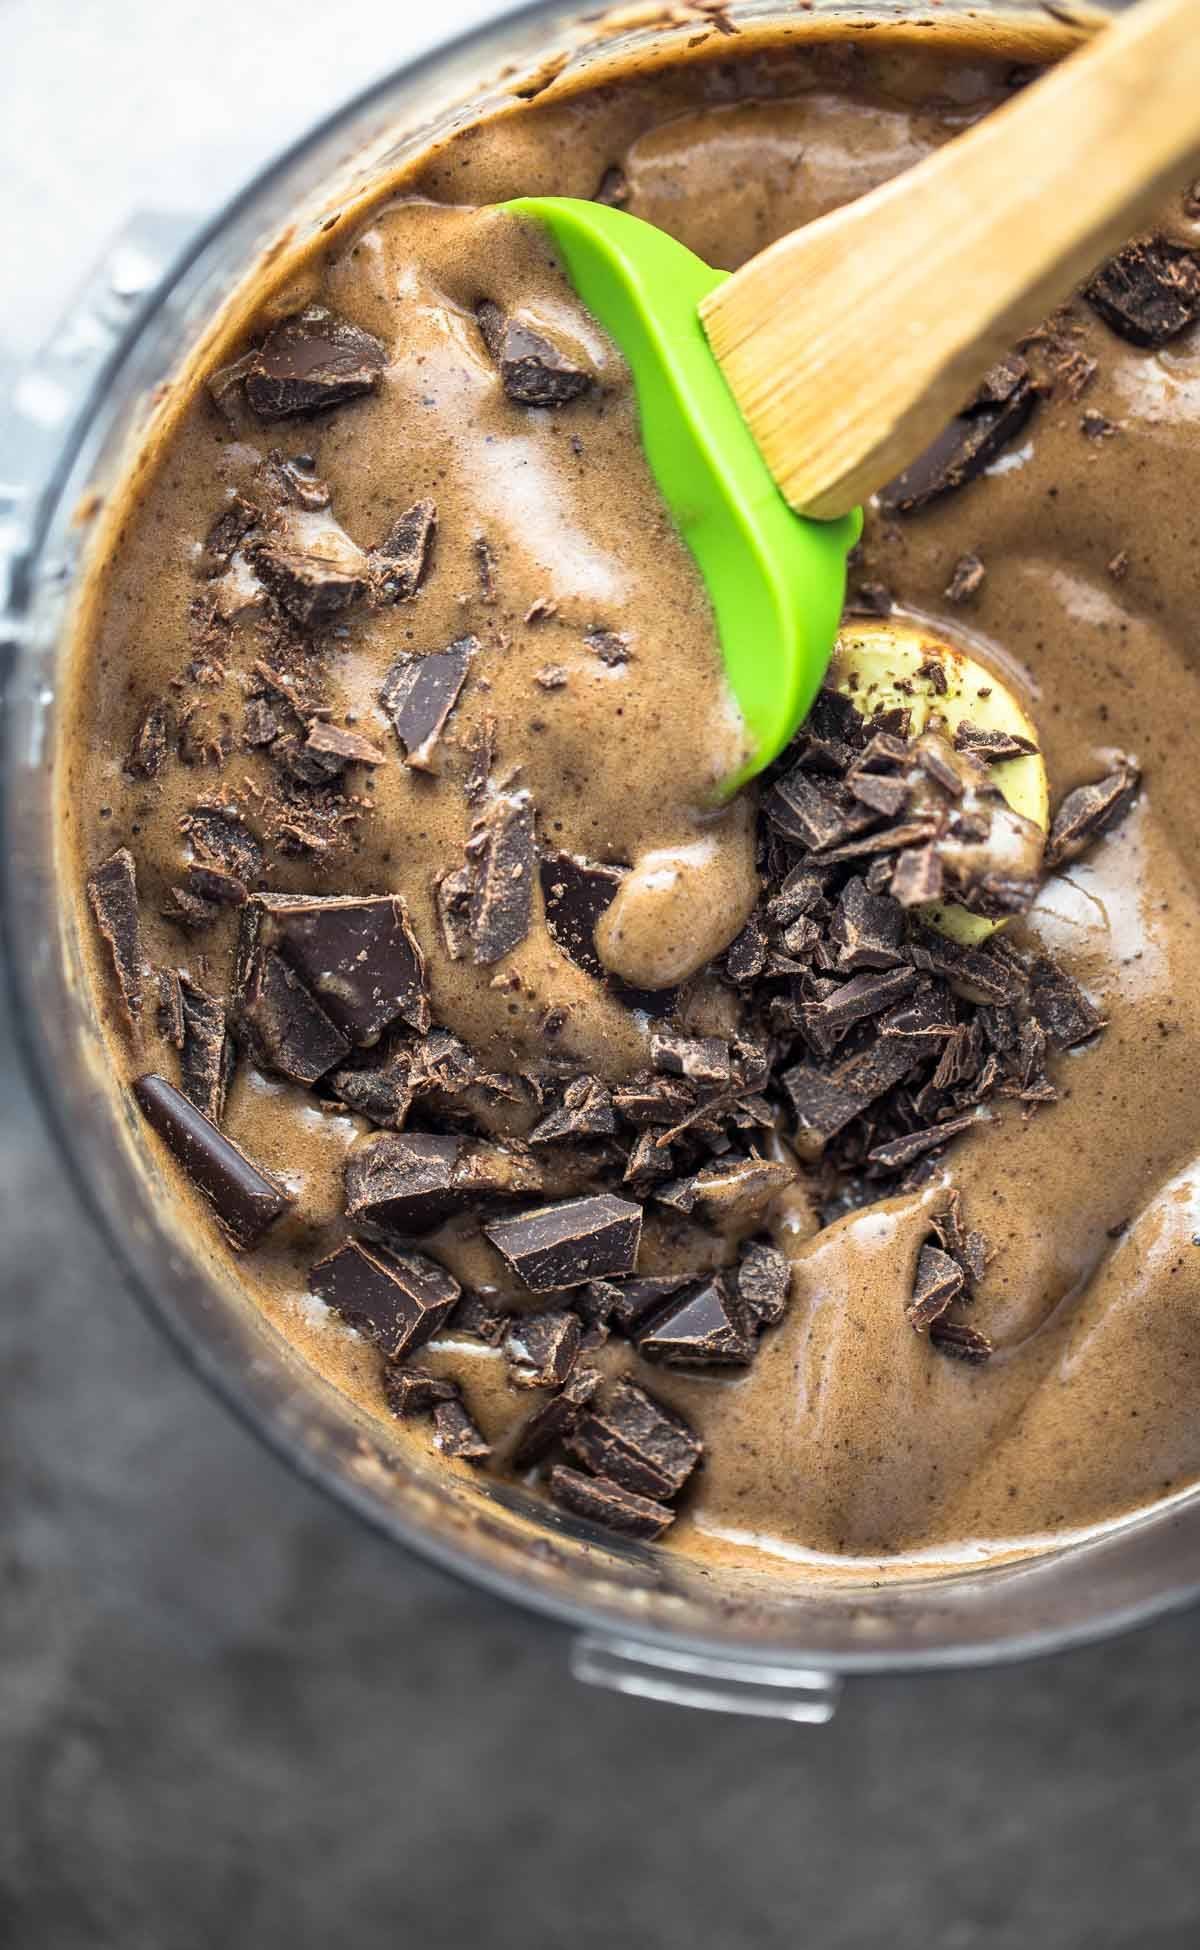 This naturally sweet ice cream is made with ALOHA superfood chocolate and bananas! You won't believe it's only 3 ingredients and 5 minutes to make! | pinchofyum.com